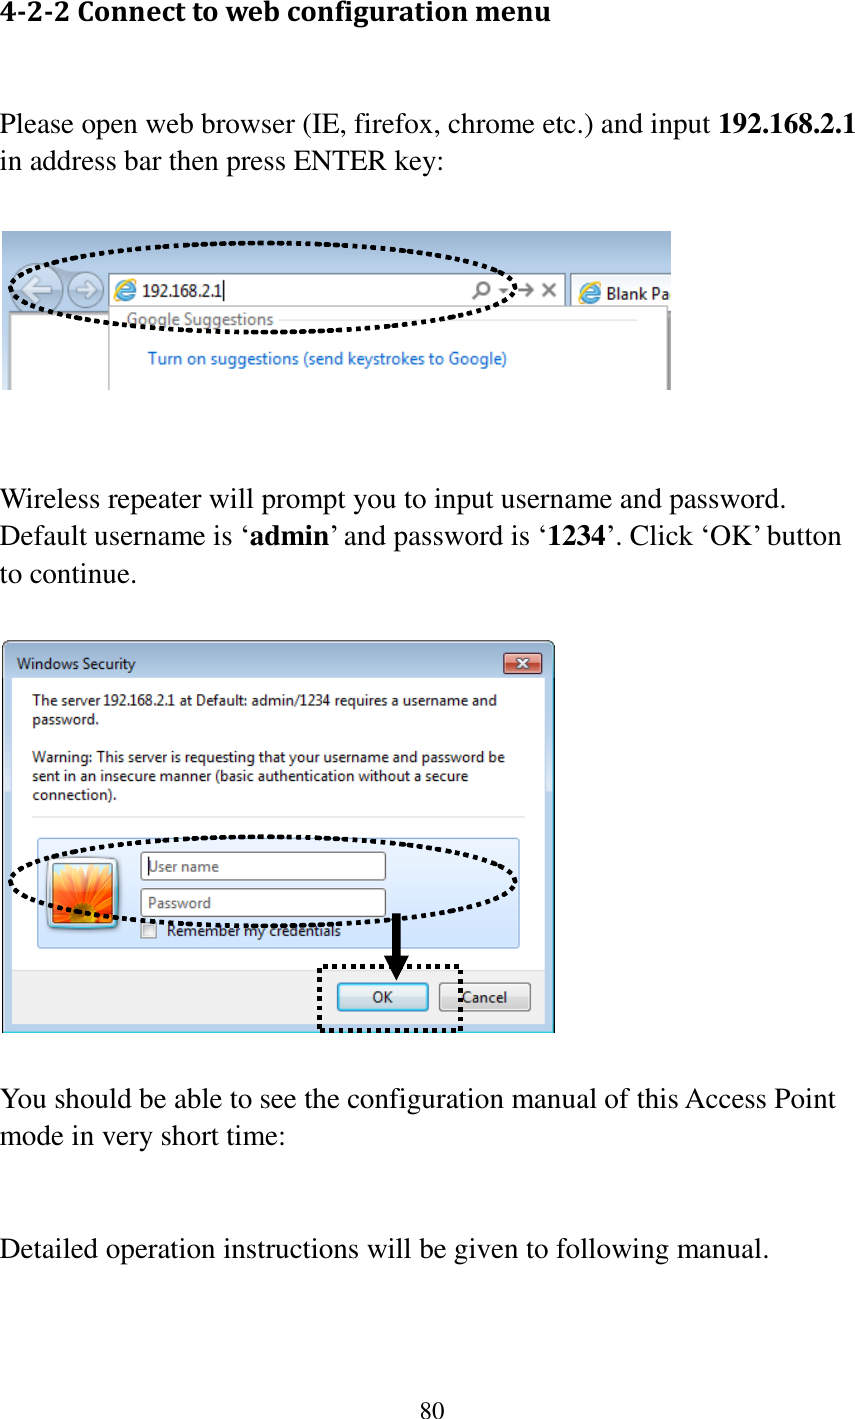 80  4-2-2 Connect to web configuration menu  Please open web browser (IE, firefox, chrome etc.) and input 192.168.2.1 in address bar then press ENTER key:     Wireless repeater will prompt you to input username and password. Default username is „admin‟ and password is „1234‟. Click „OK‟ button to continue.    You should be able to see the configuration manual of this Access Point mode in very short time:   Detailed operation instructions will be given to following manual.    